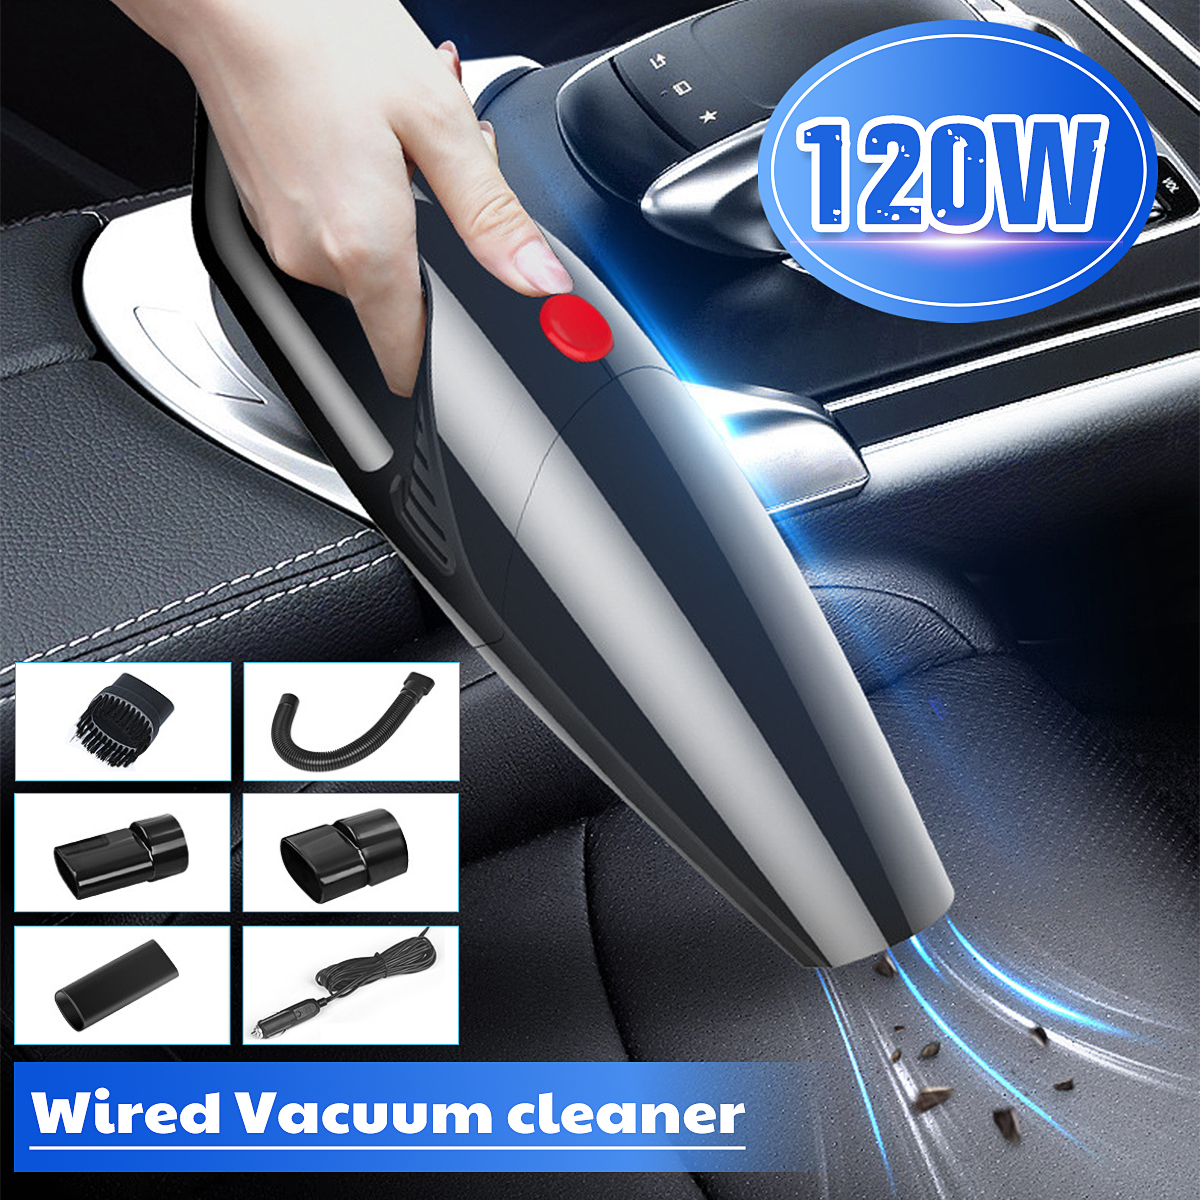 120W-4500kpa-Car-Wired-Vacuum-Cleaner-Handheld-Rechargeable-Mini-Home-Duster-1610857-2